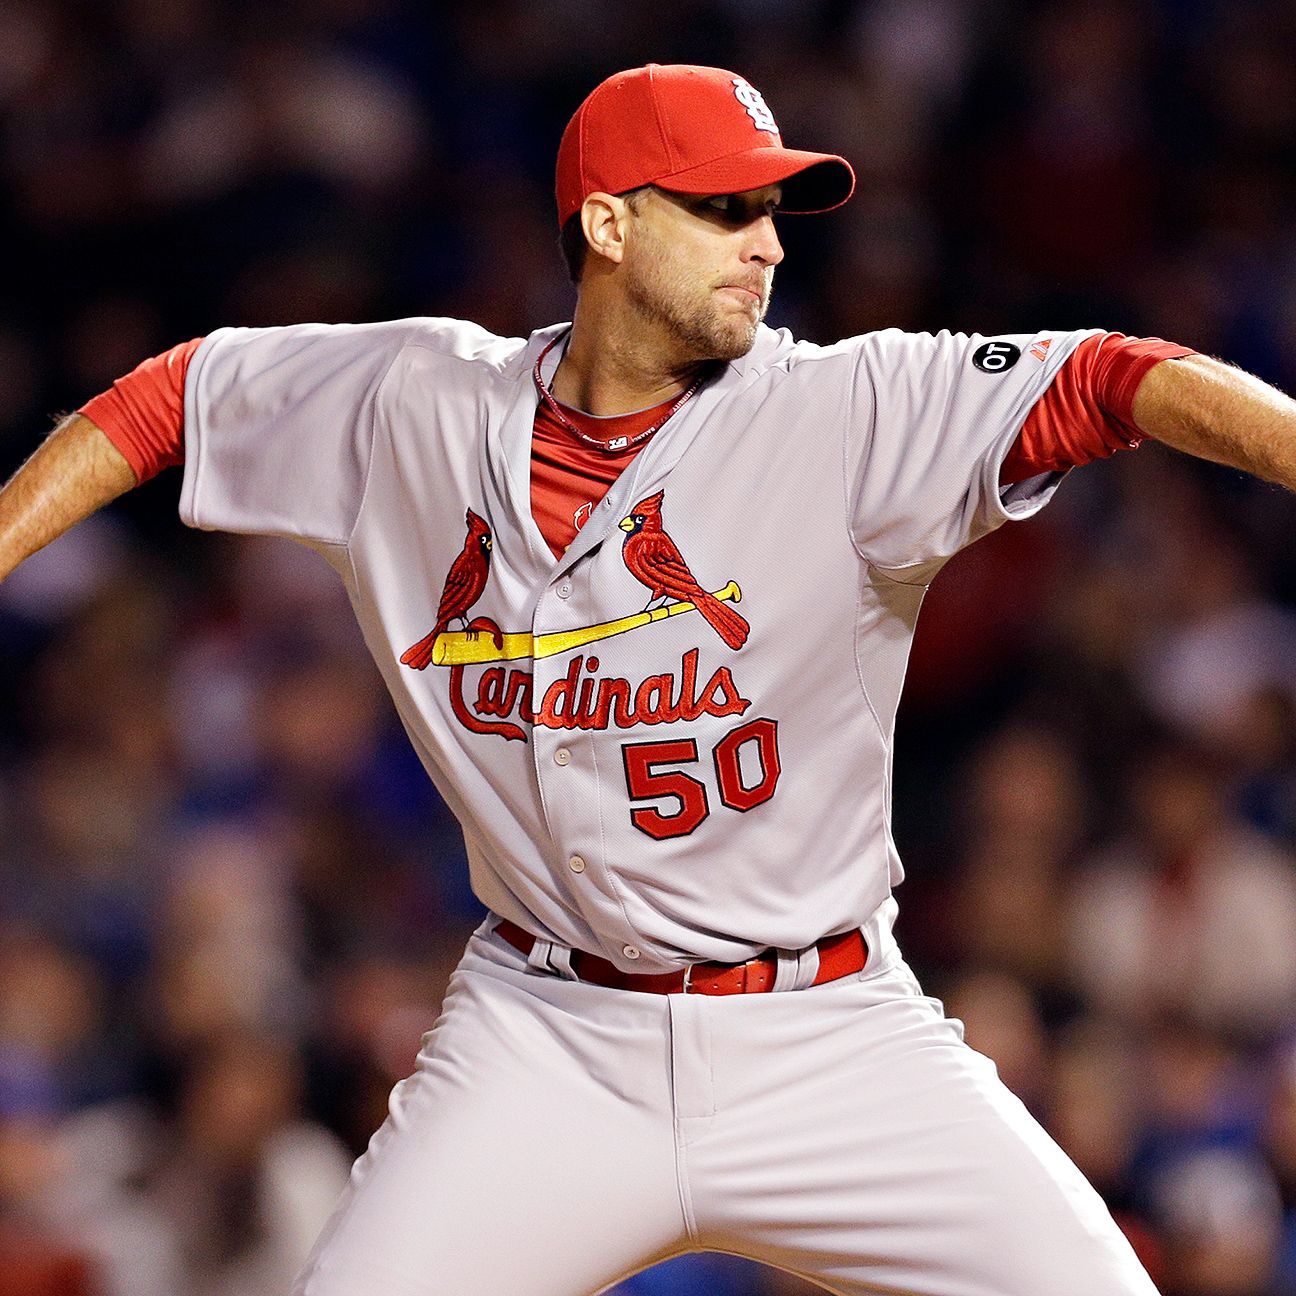 Adam Wainwright of St. Louis Cardinals goes on disabled list with left ankle injury